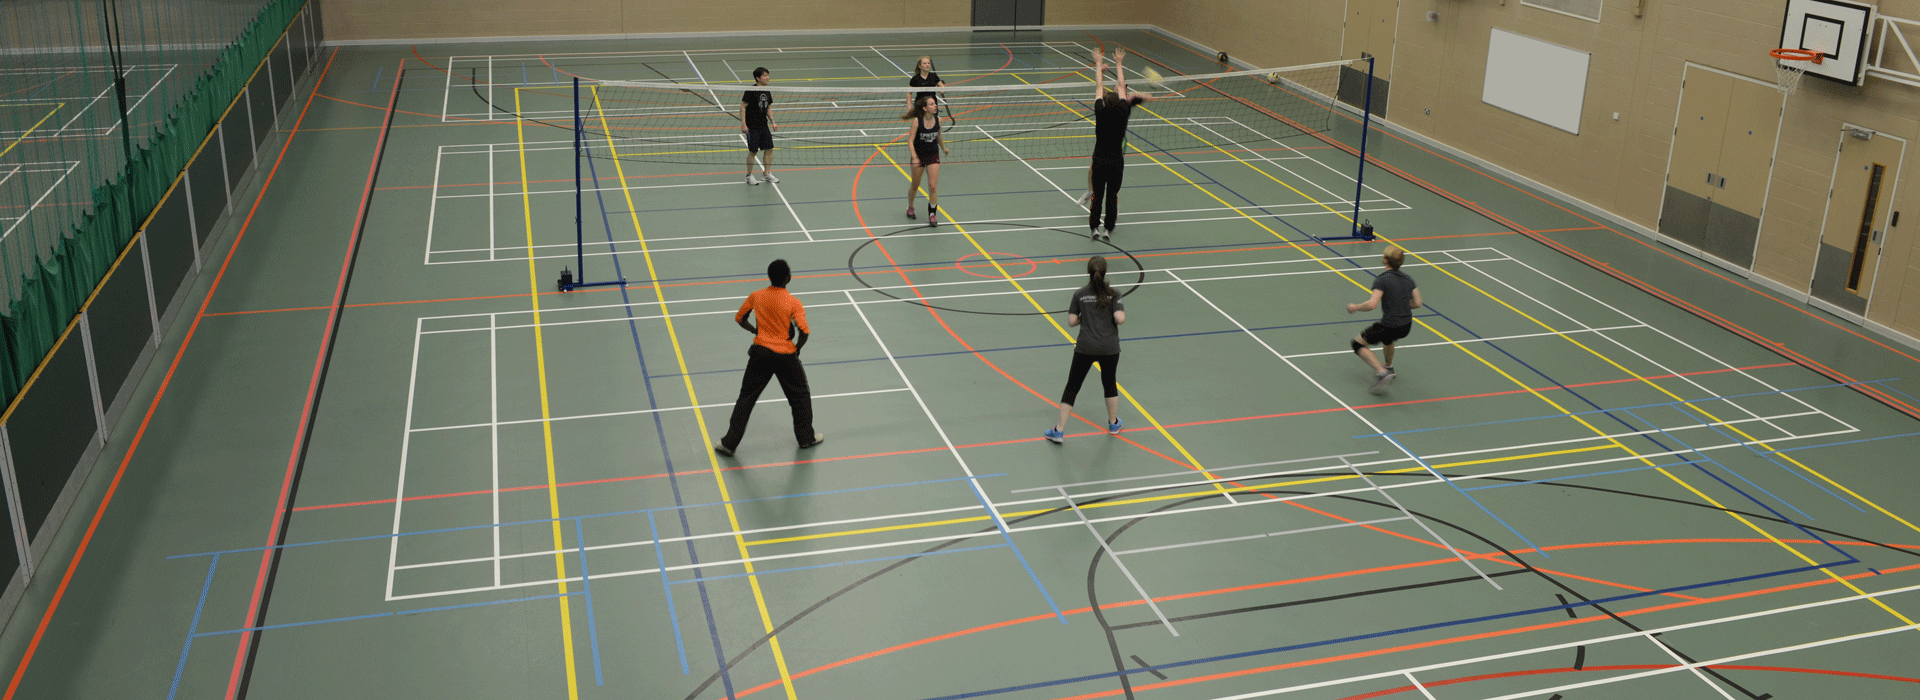 Badminton in the Sports Hall at Malvern Active